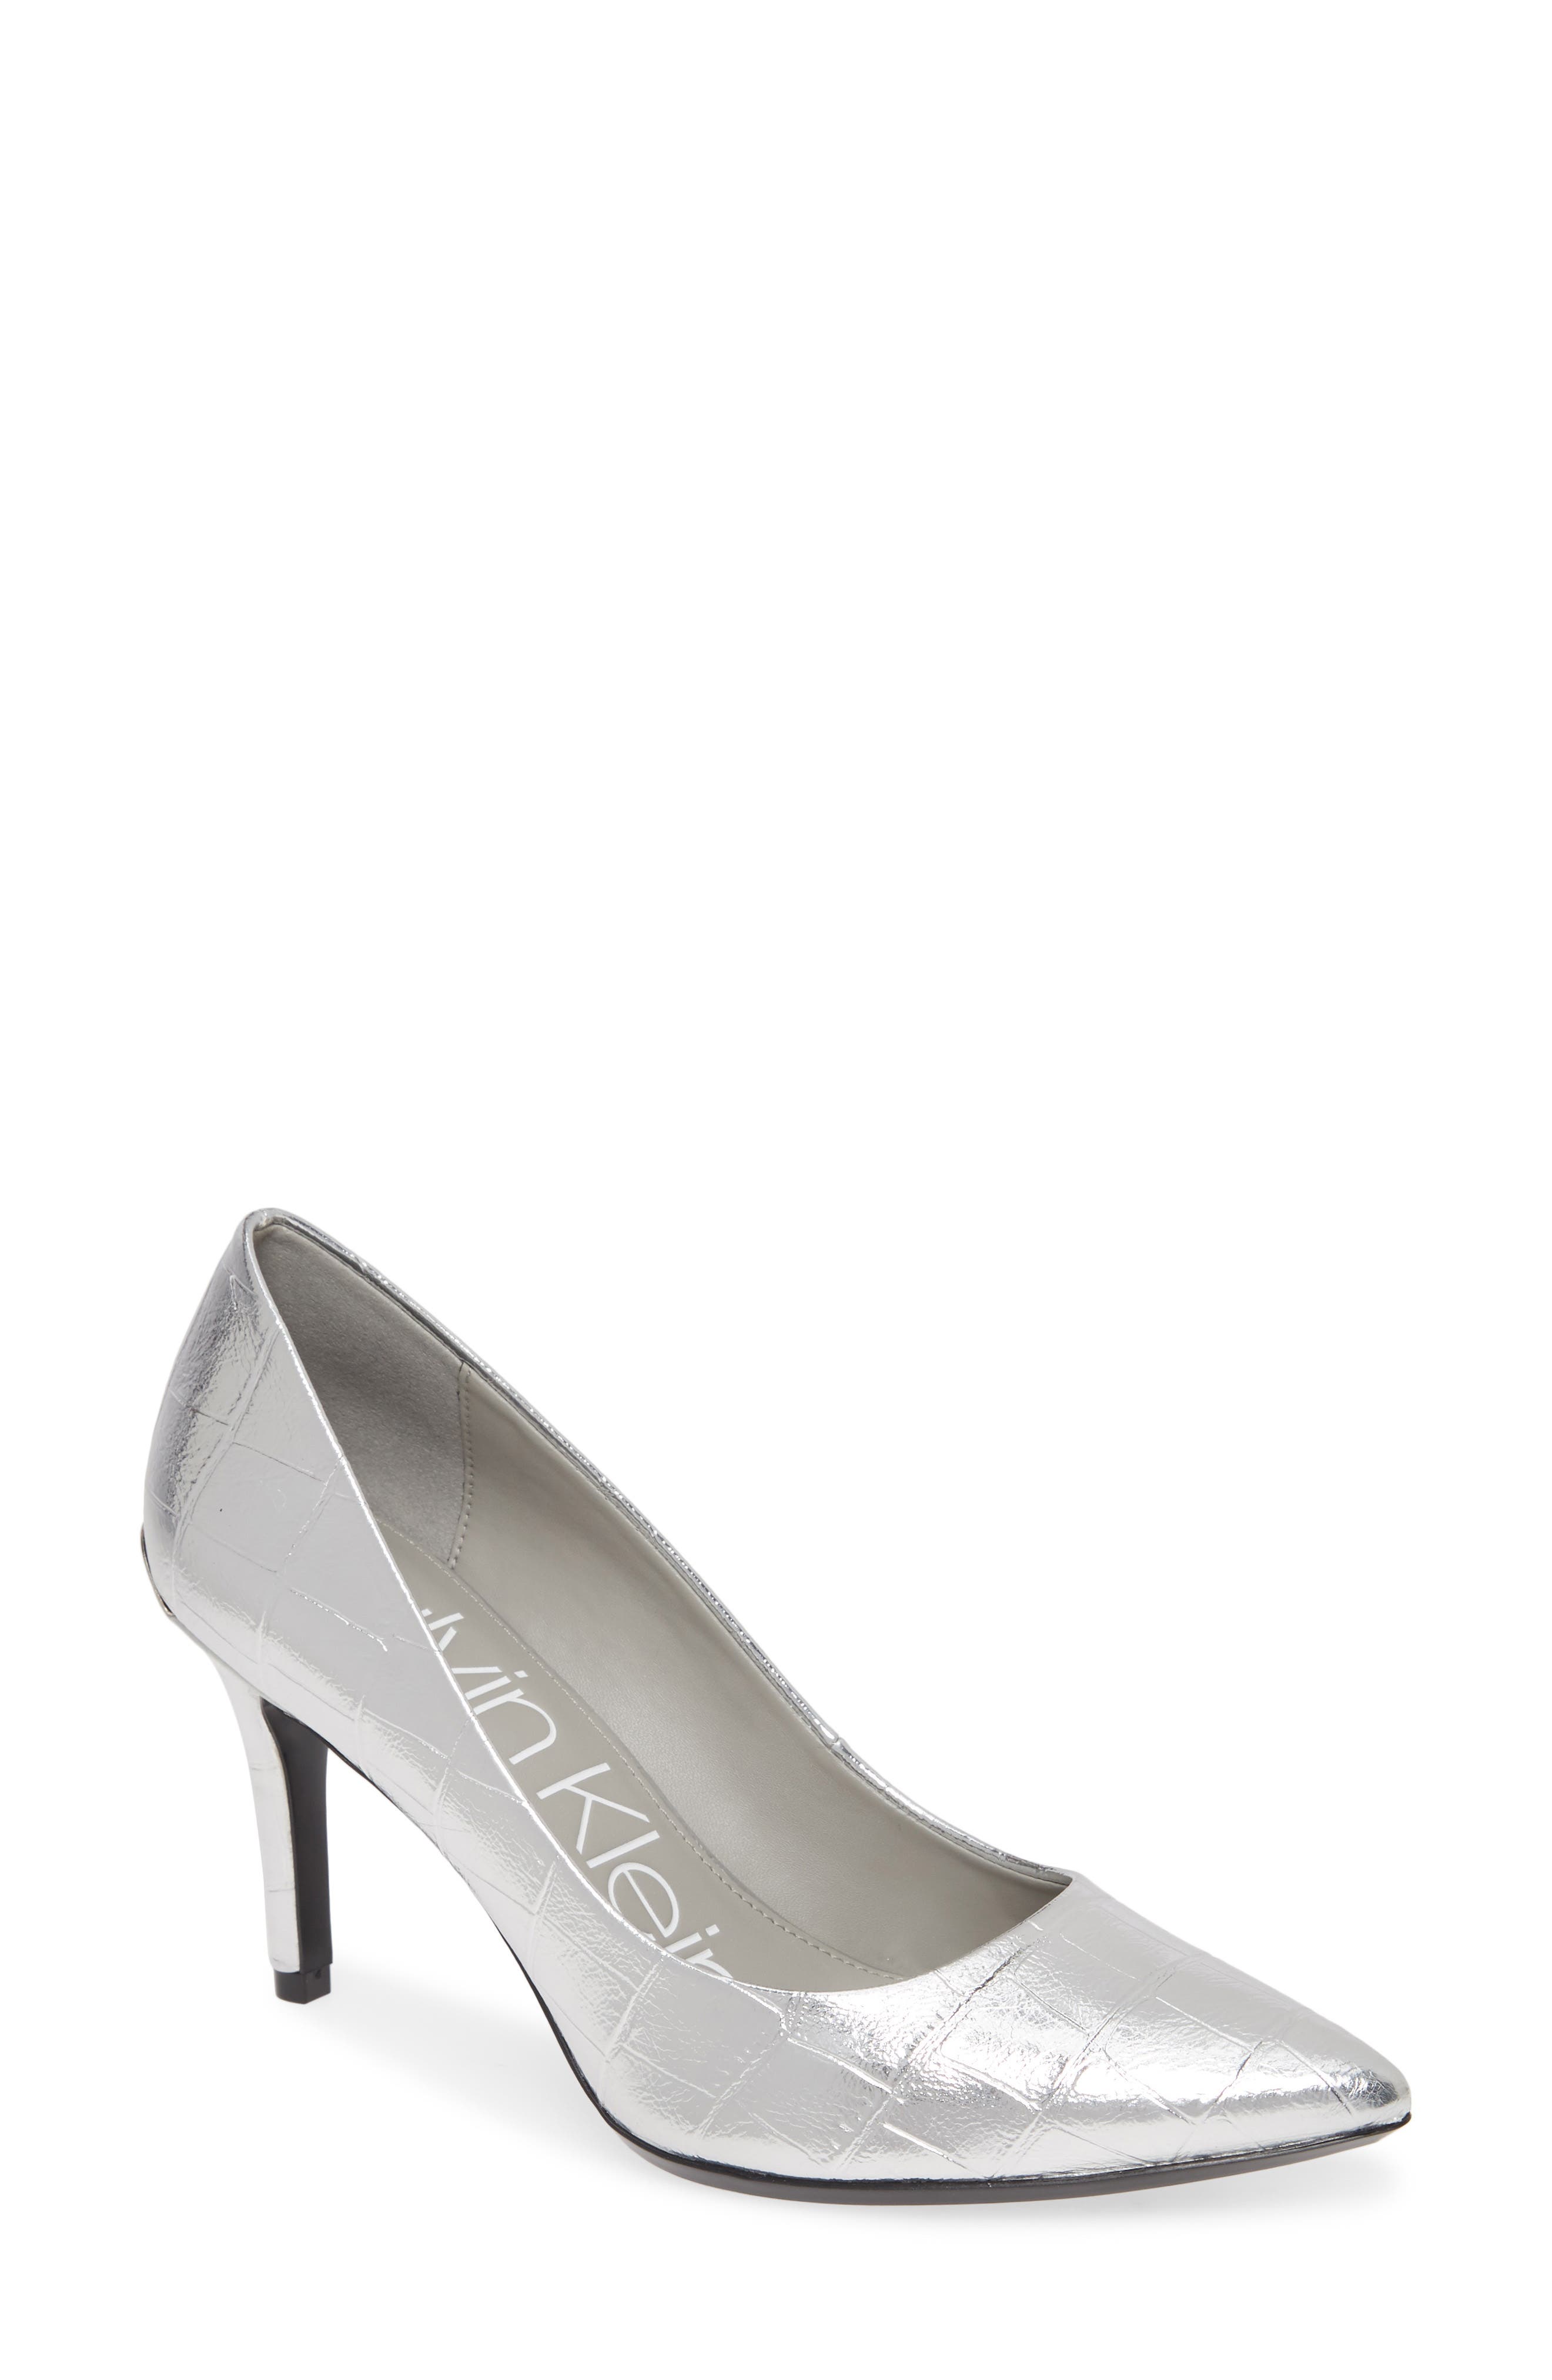 UPC 194060223148 product image for Women's Calvin Klein Gayle Pointed Toe Pump, Size 6 M - Metallic | upcitemdb.com